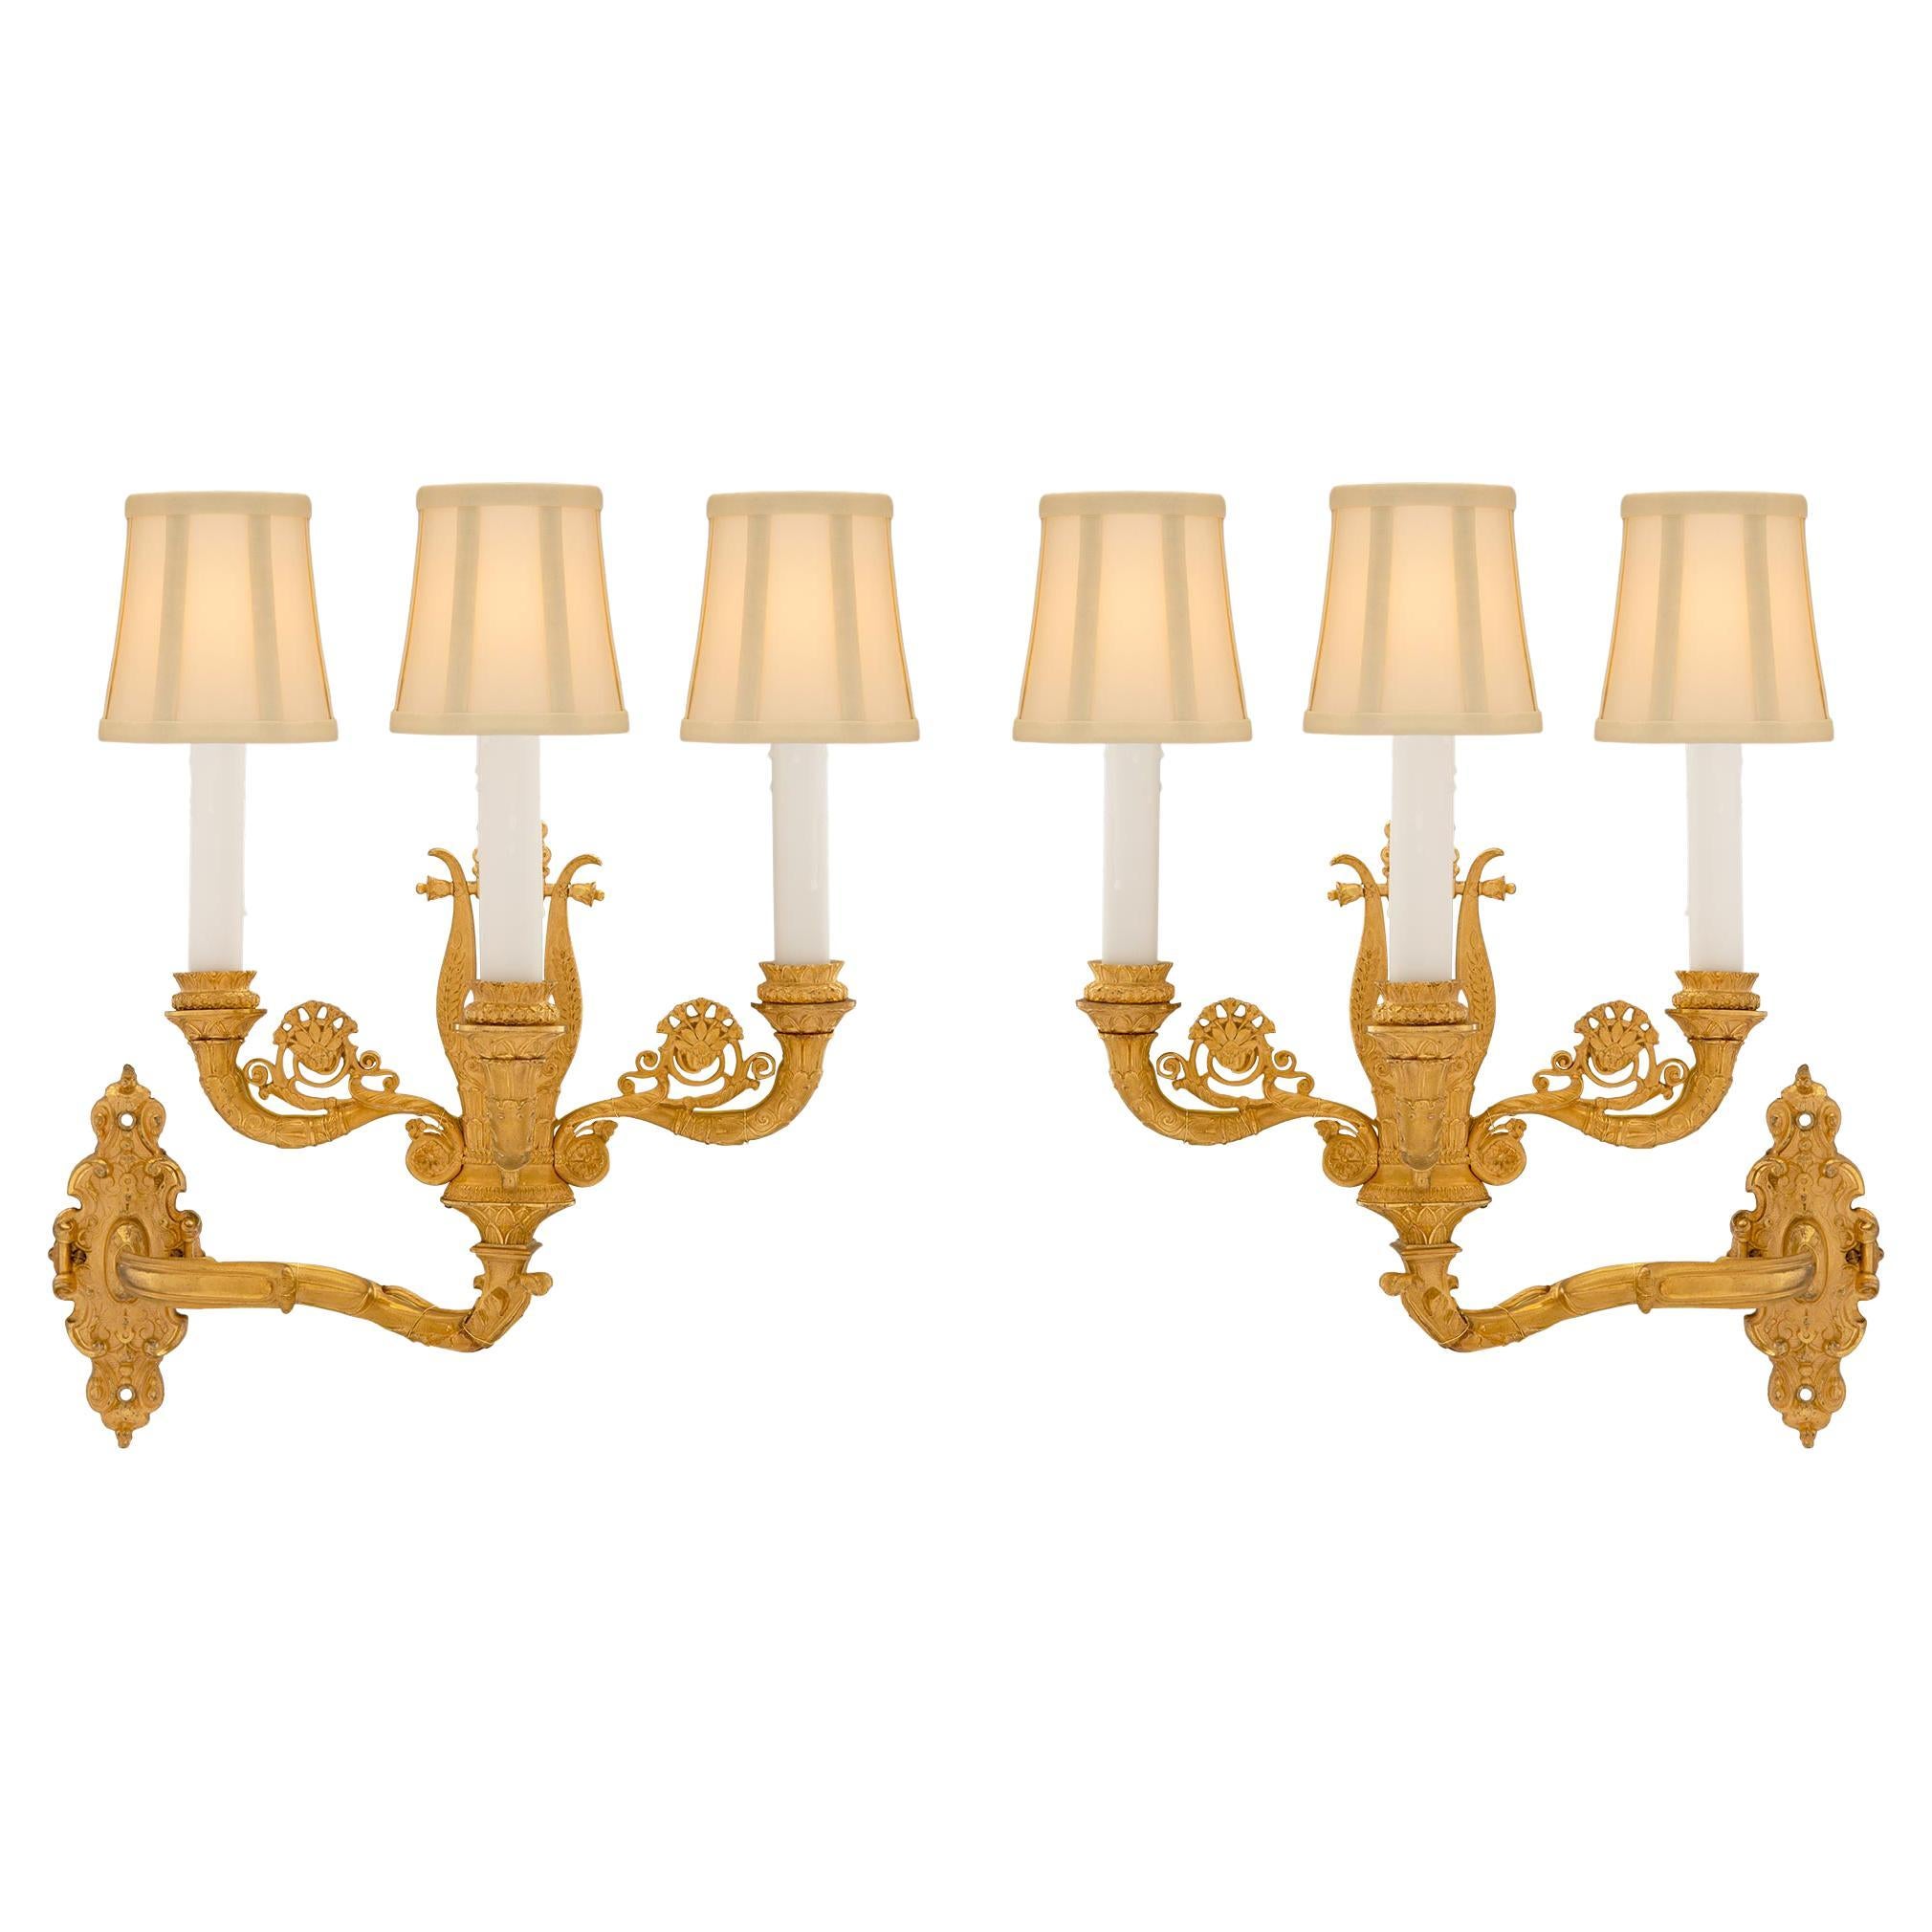 Pair of French 19th Century Charles X Period Ormolu Sconces